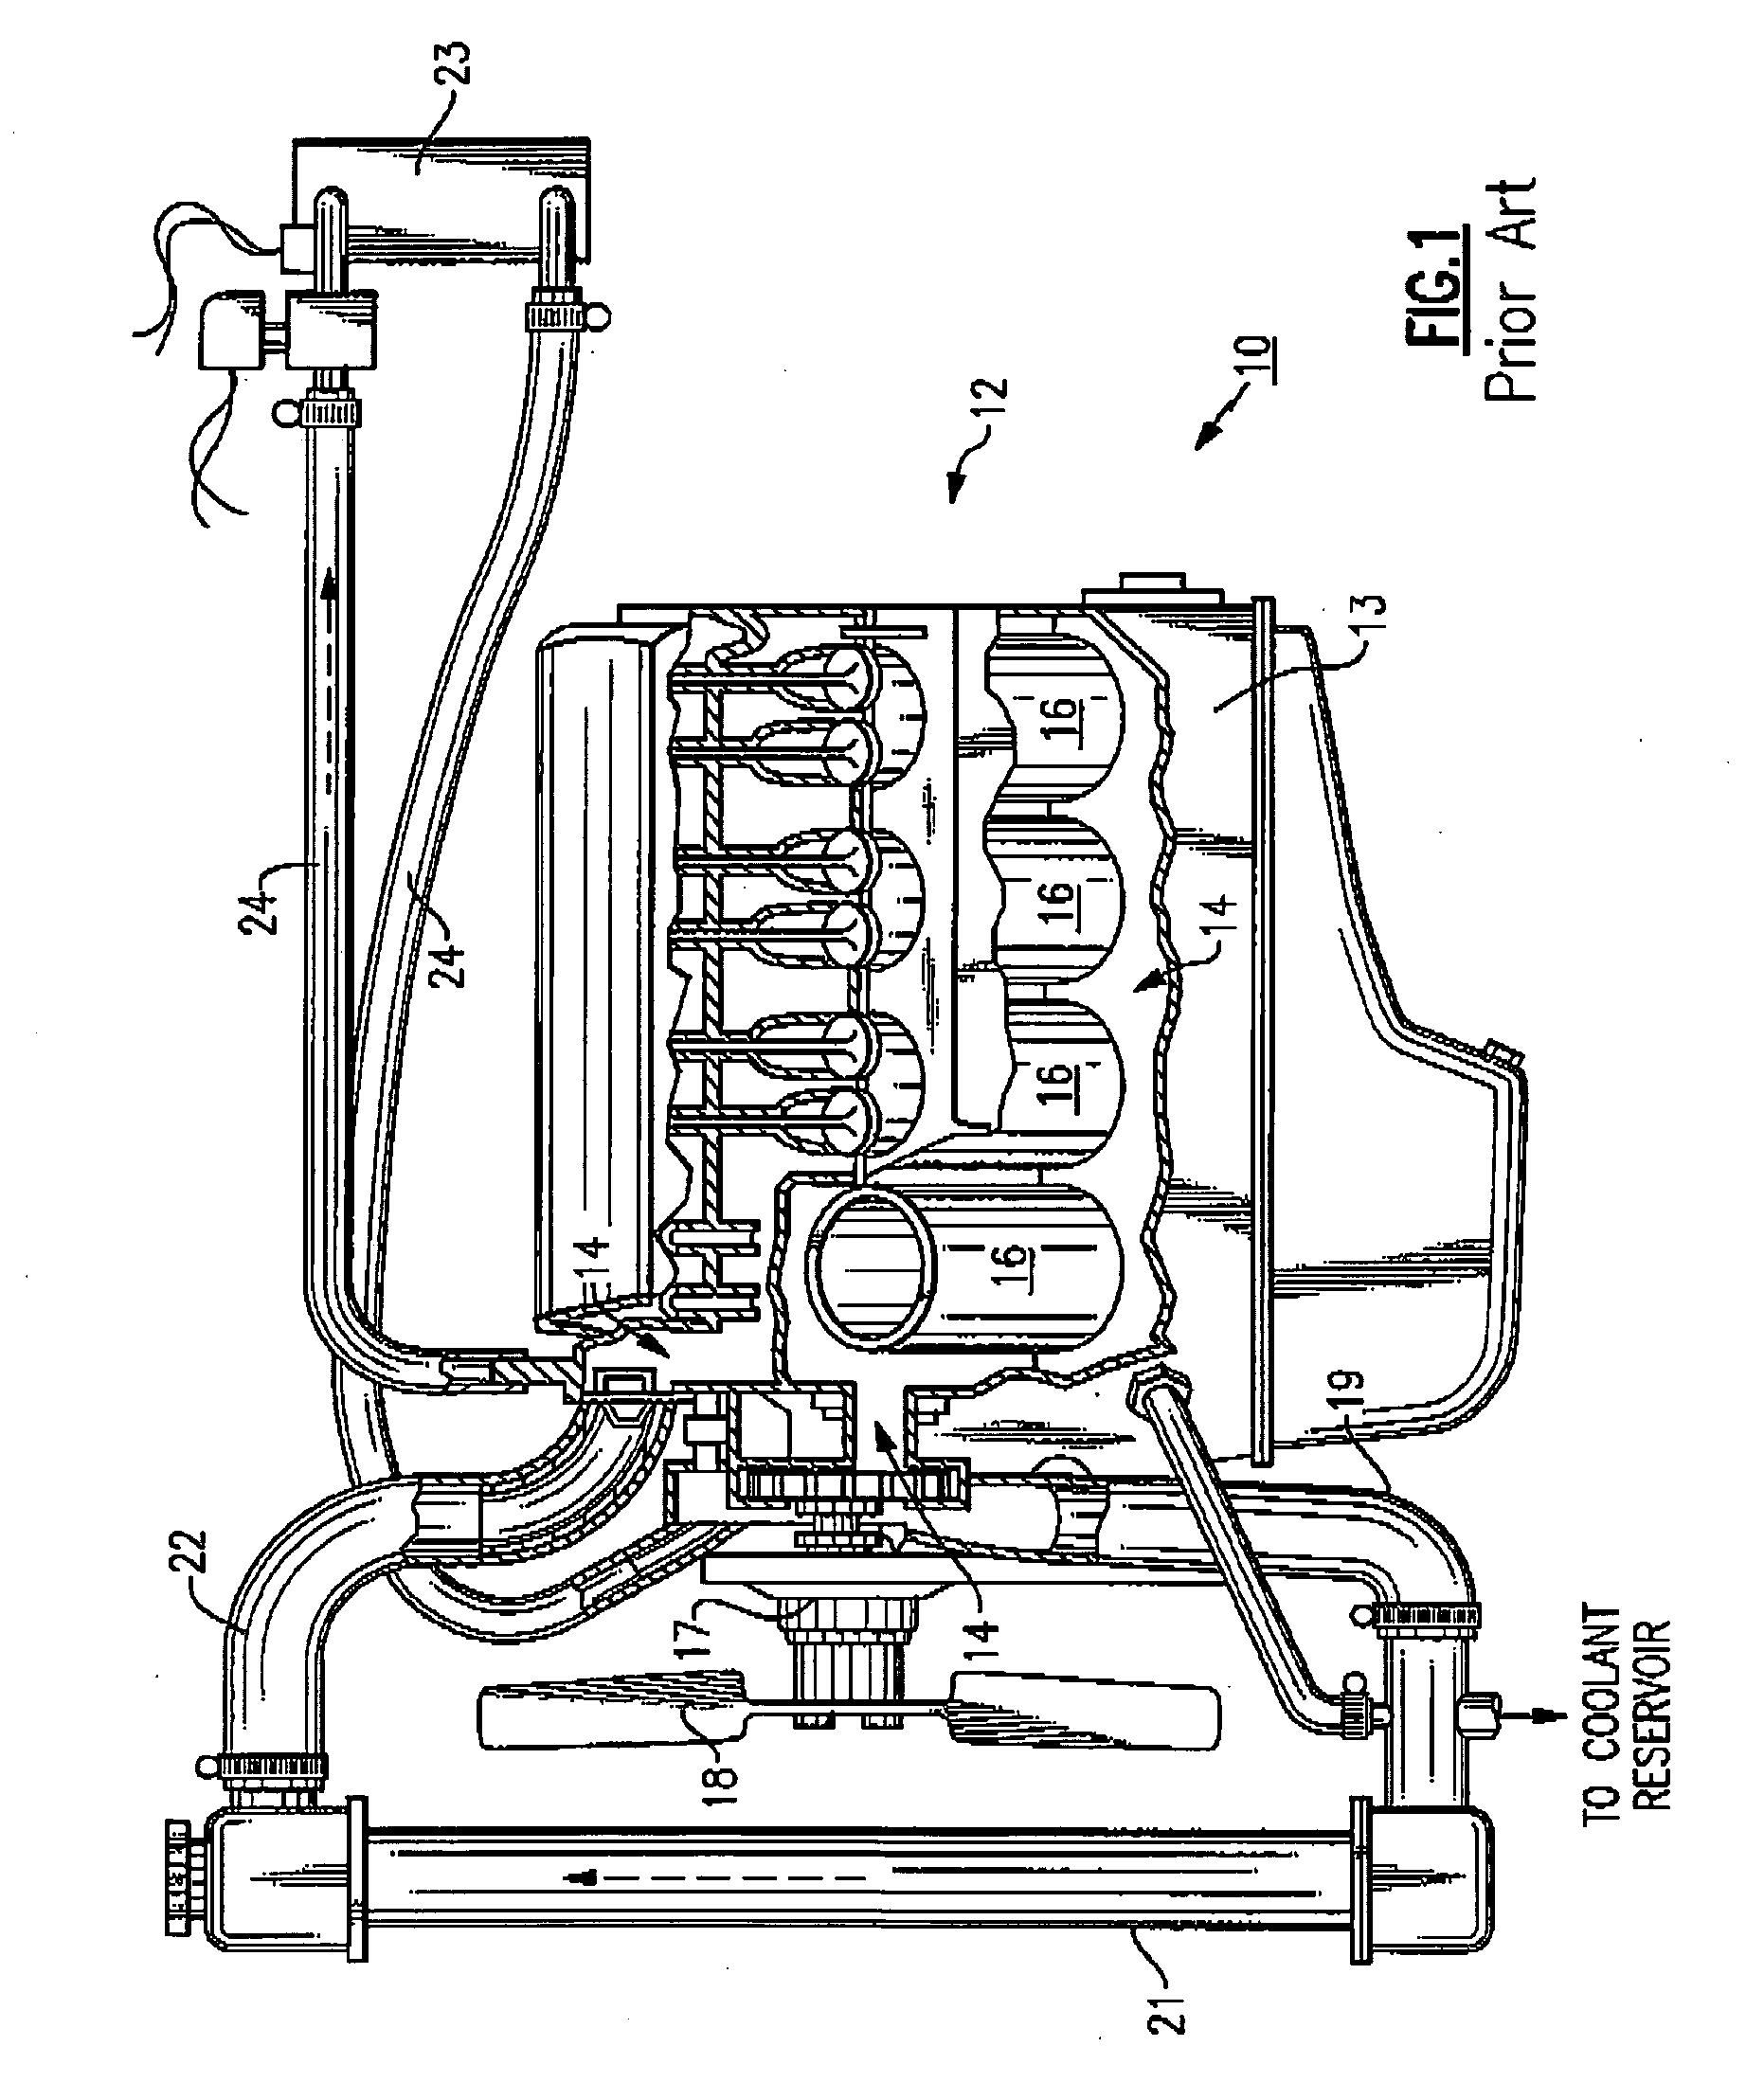 Heating element for an internal combustion engine